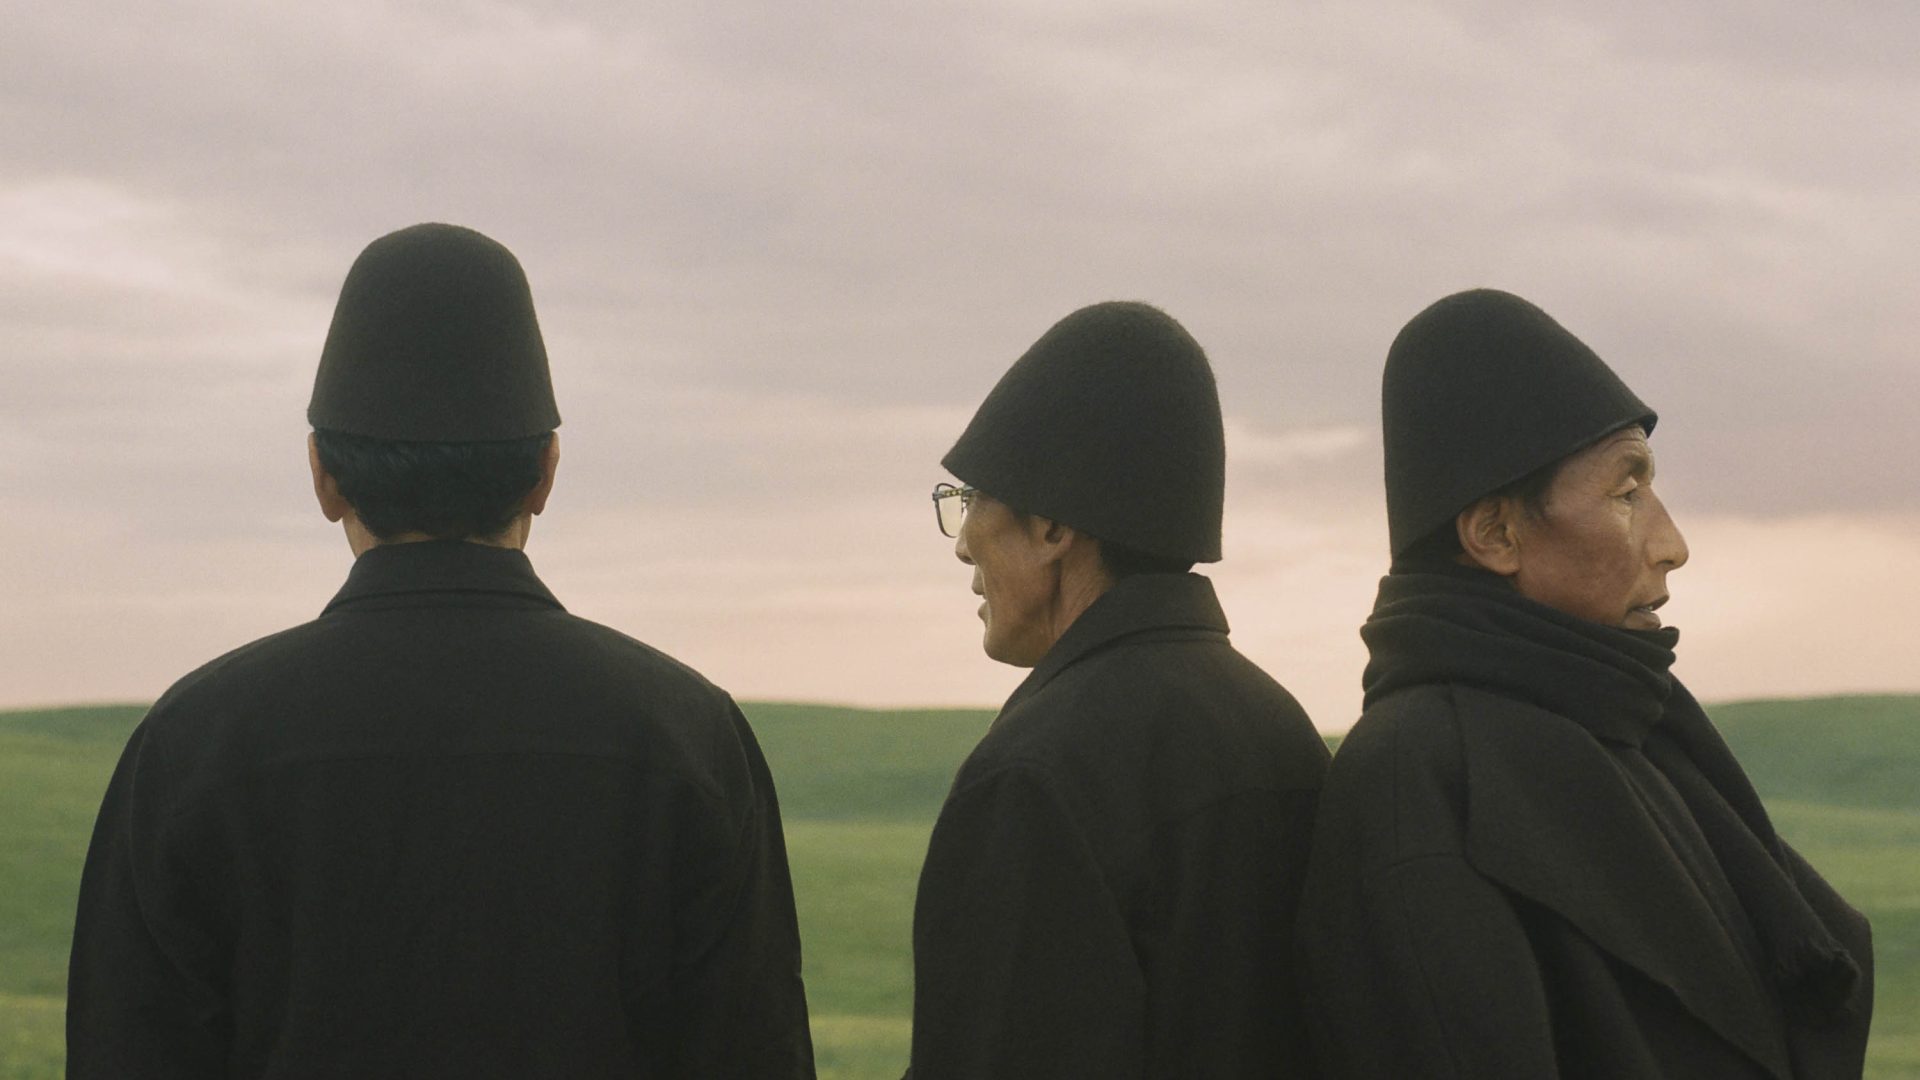 Three men in black robes and hats stand in a field looking away.